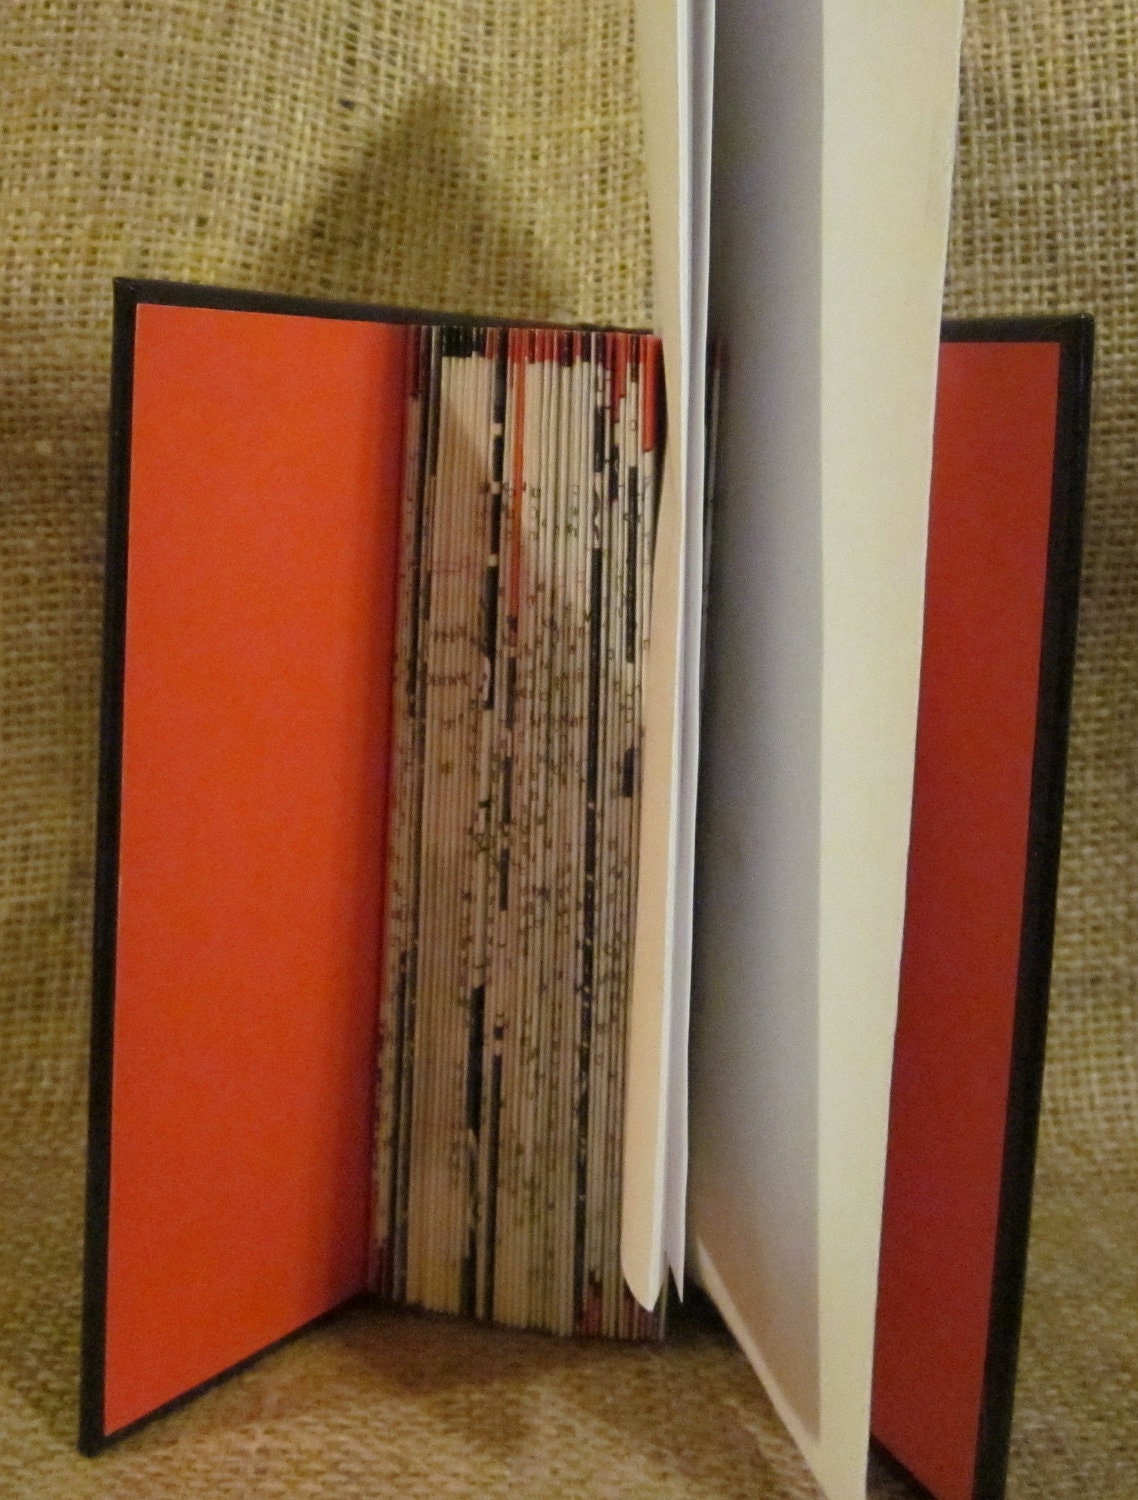 Recycled / Upcycled Altered Book Mail Holder / Organizer - Murder on the Riviera Express - TheBookCellar